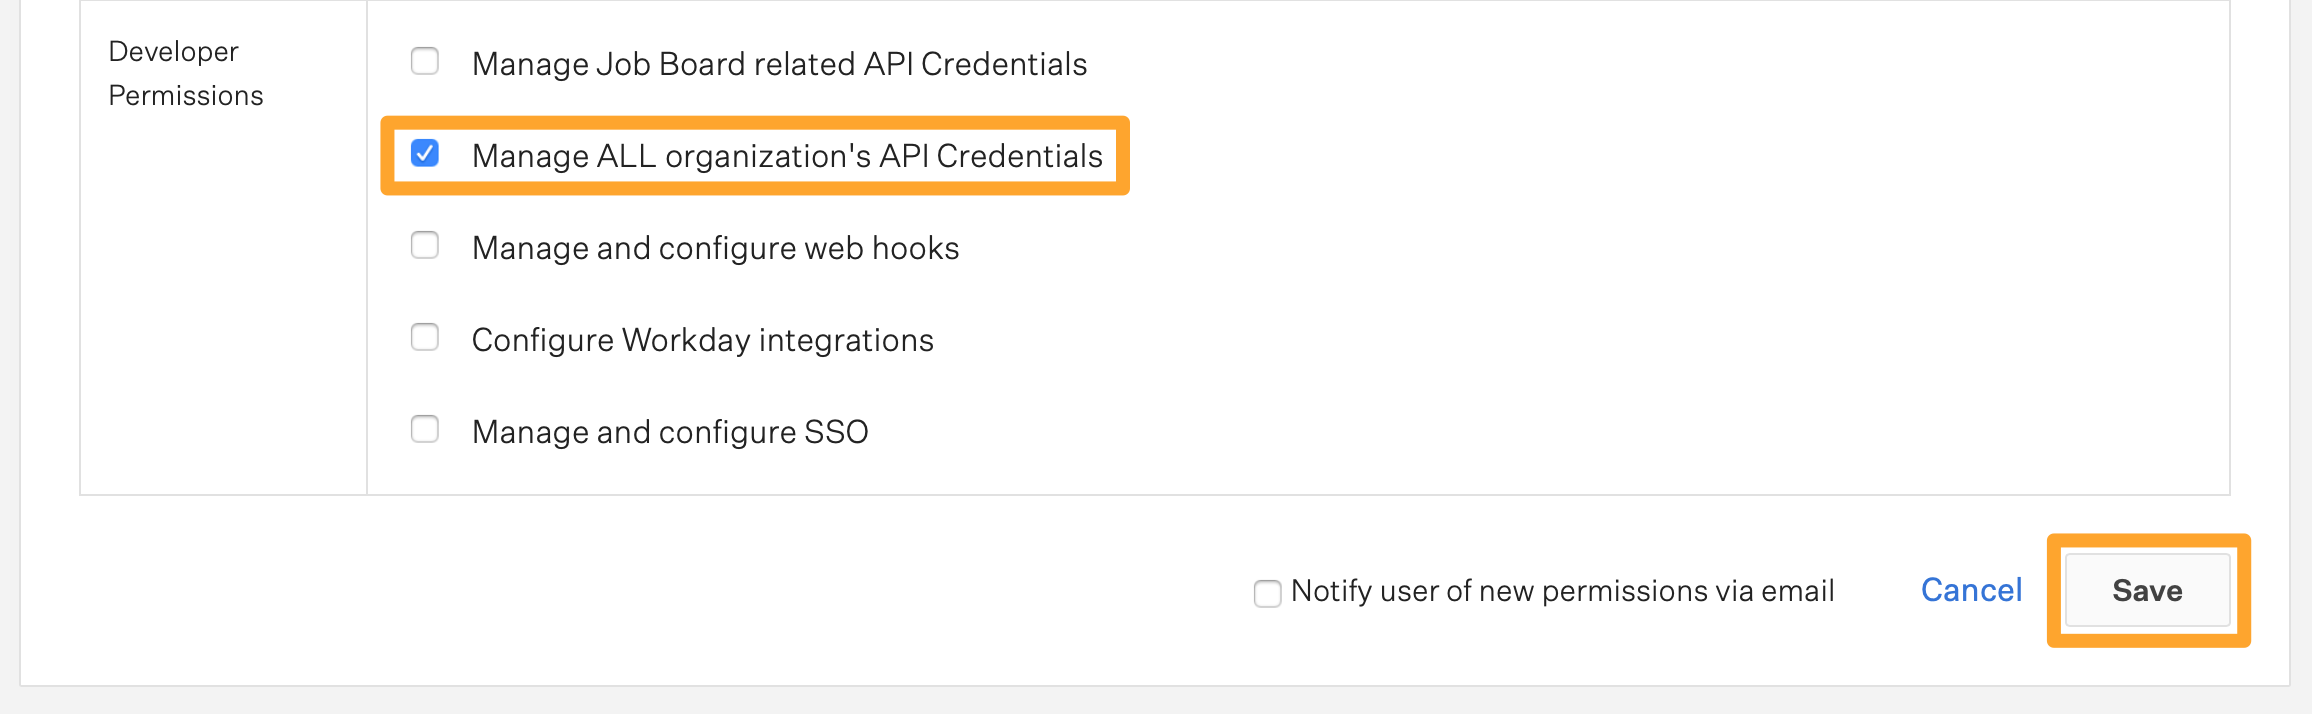 Permission: Can manage ALL organization's API credentials